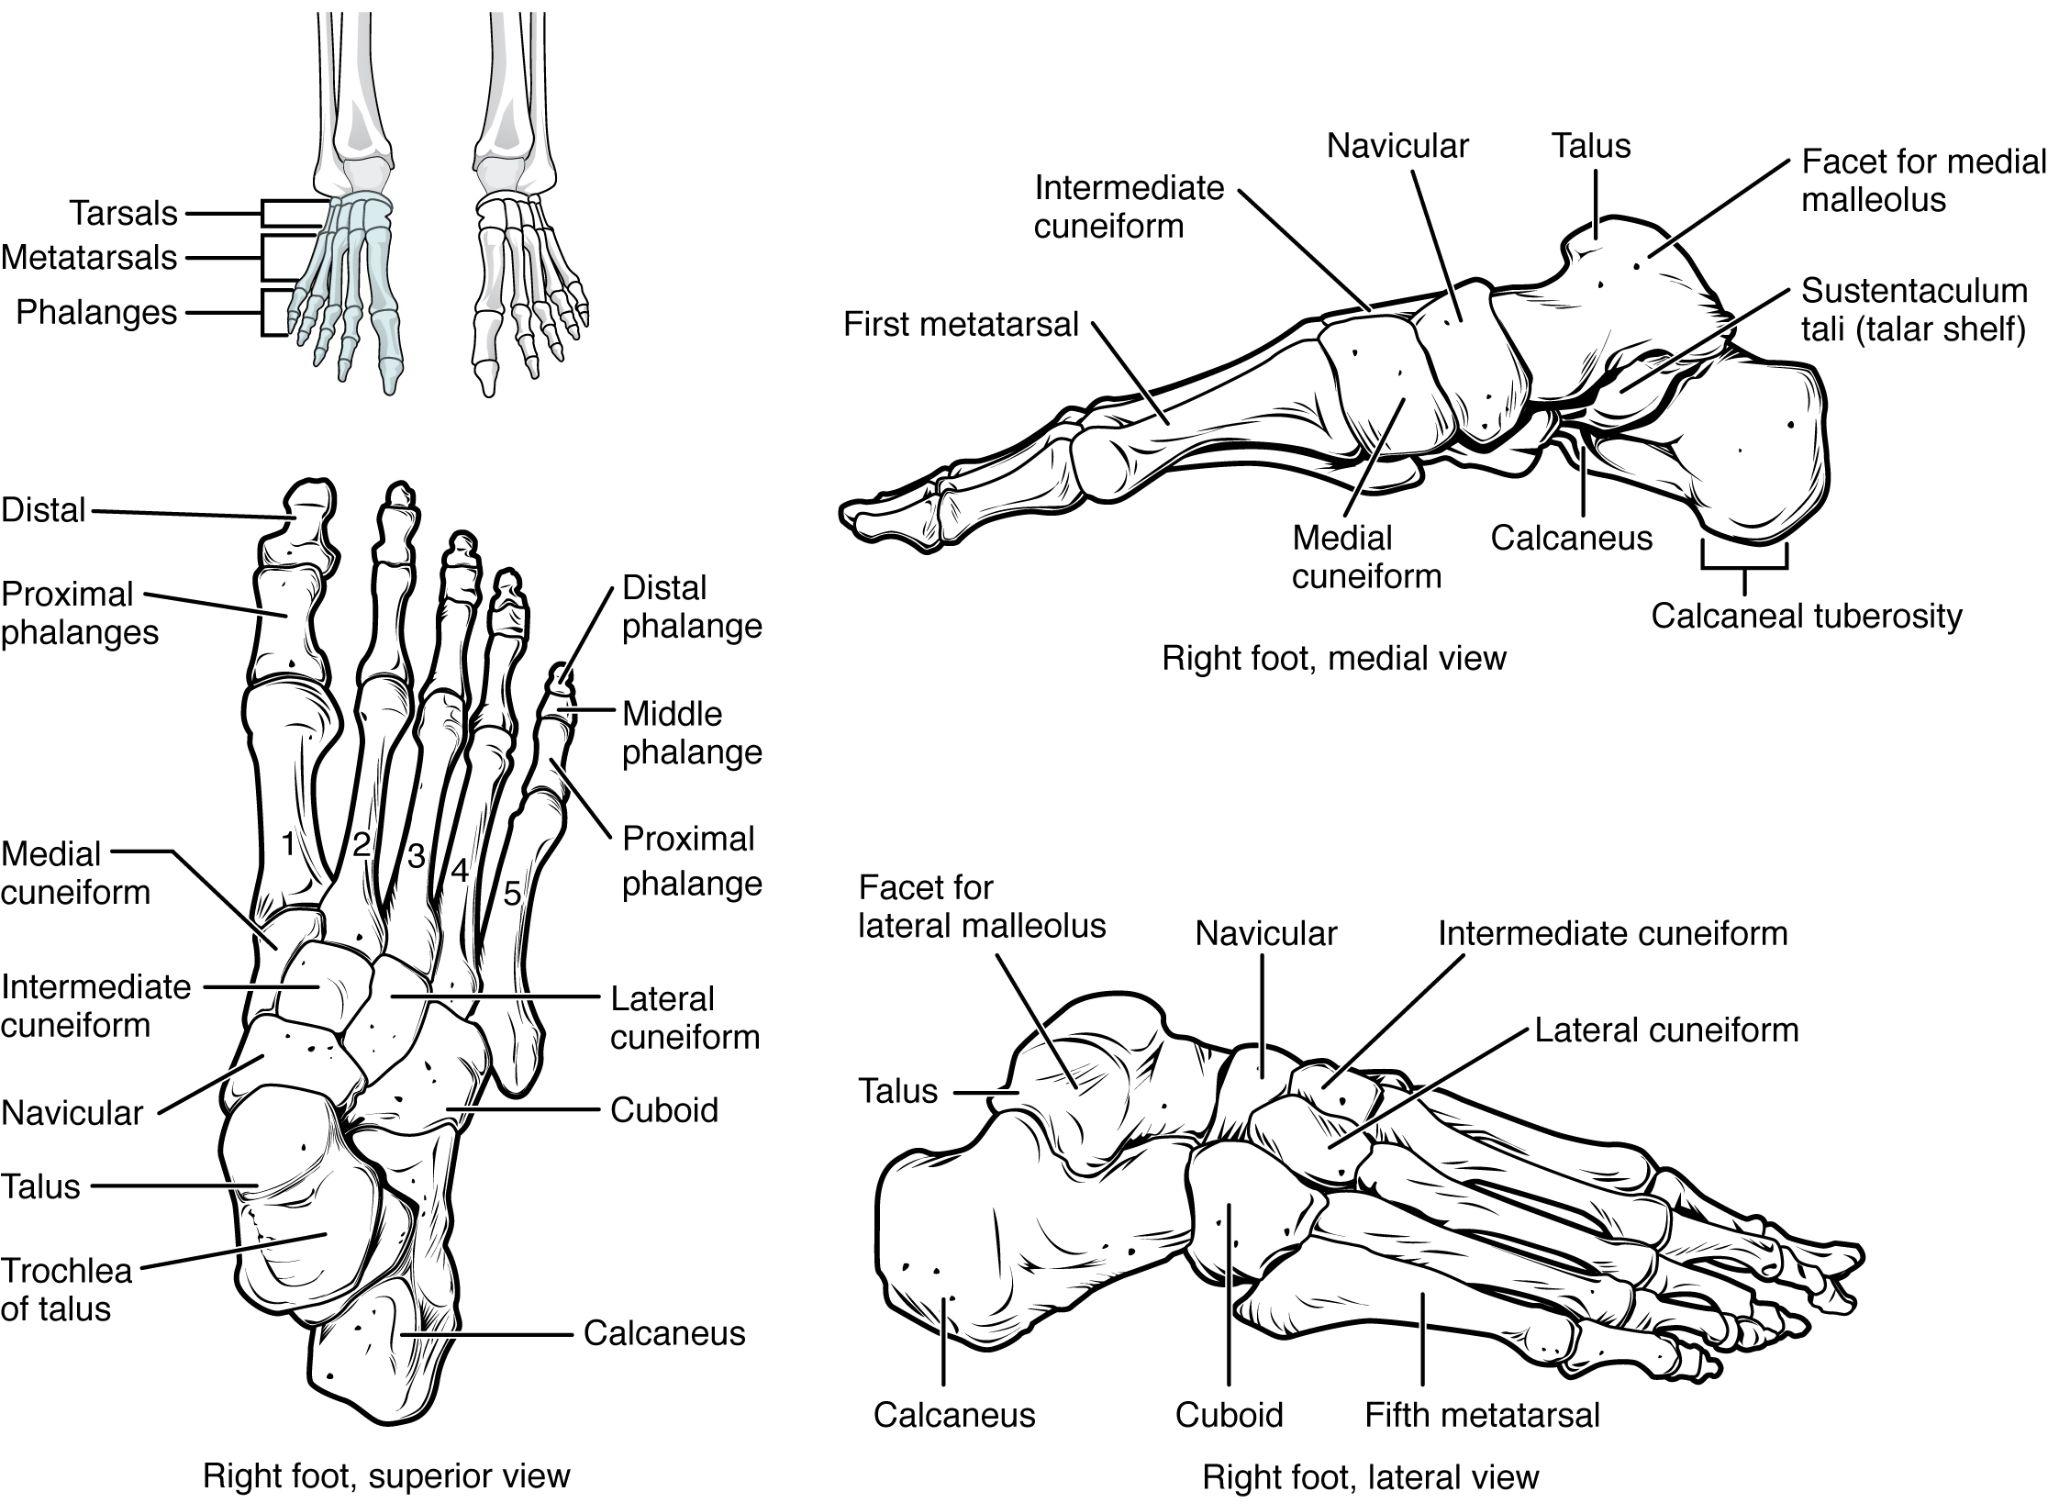 Foot bones in articulation, in superior, medial, and lateral views.